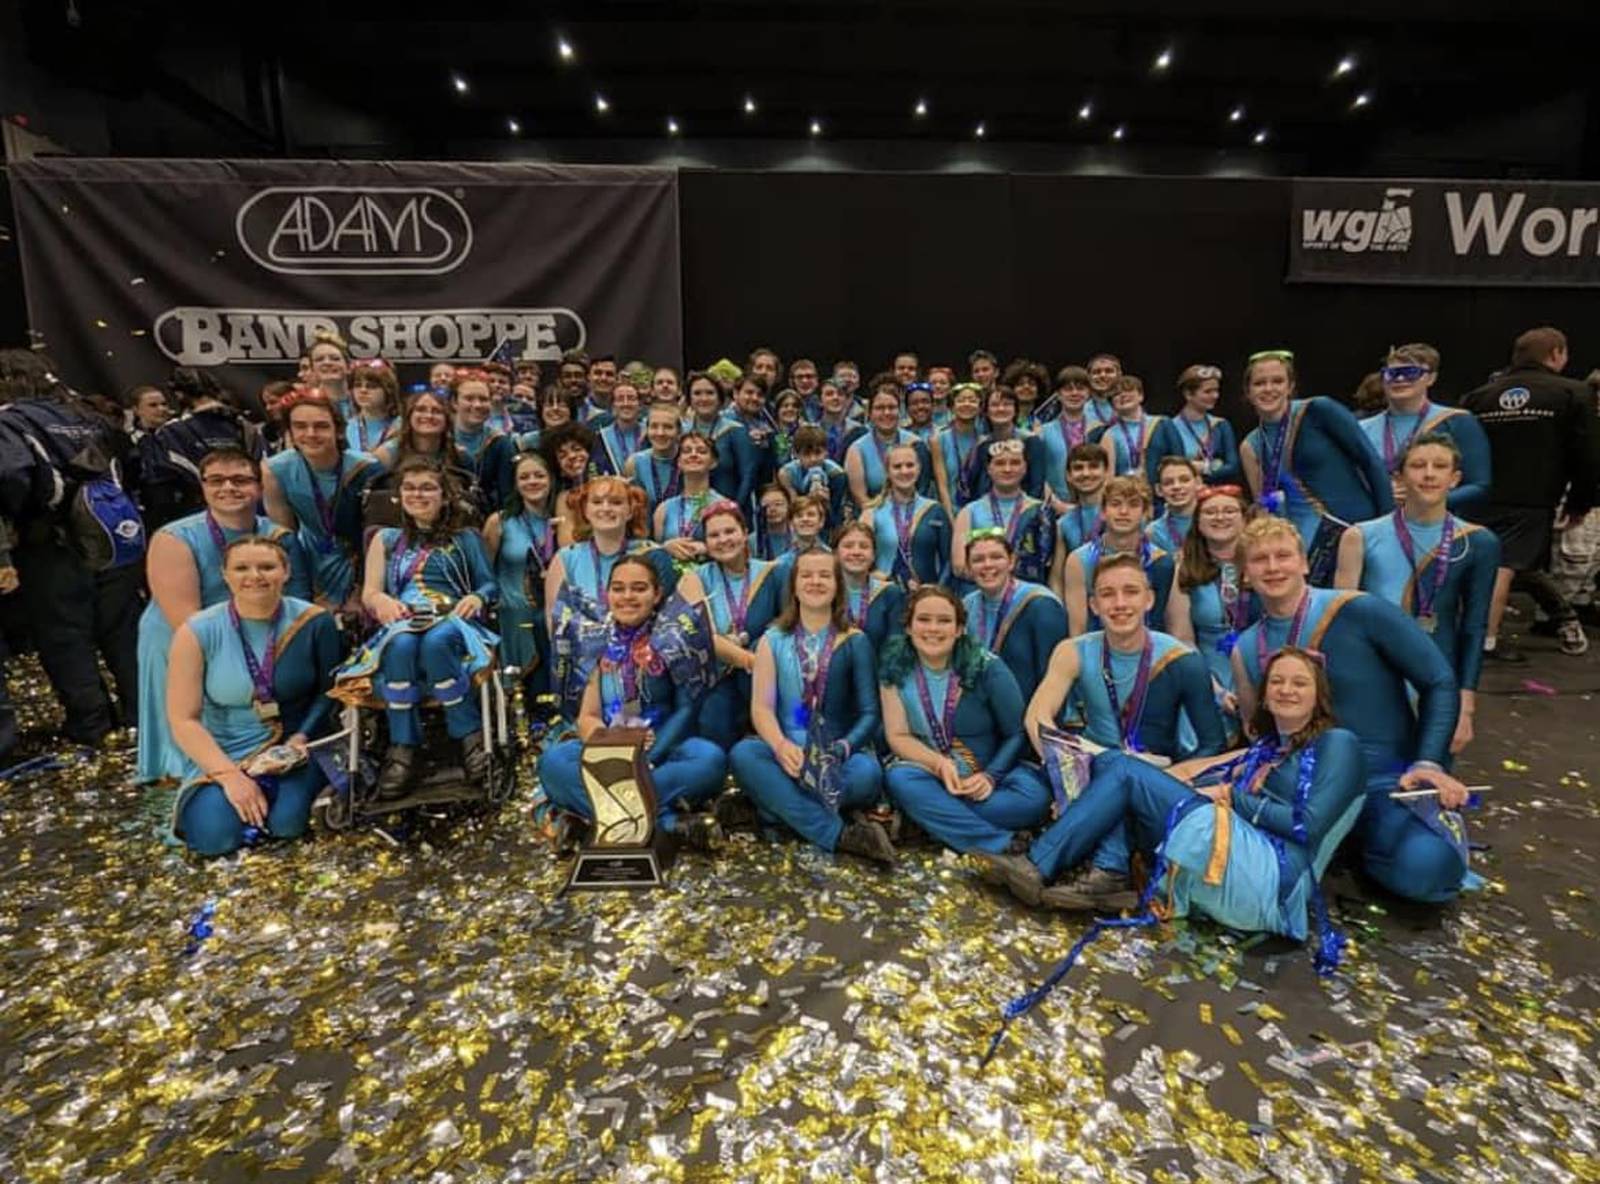 Miamisburg high school bands finish 2nd in WGI World Championships in